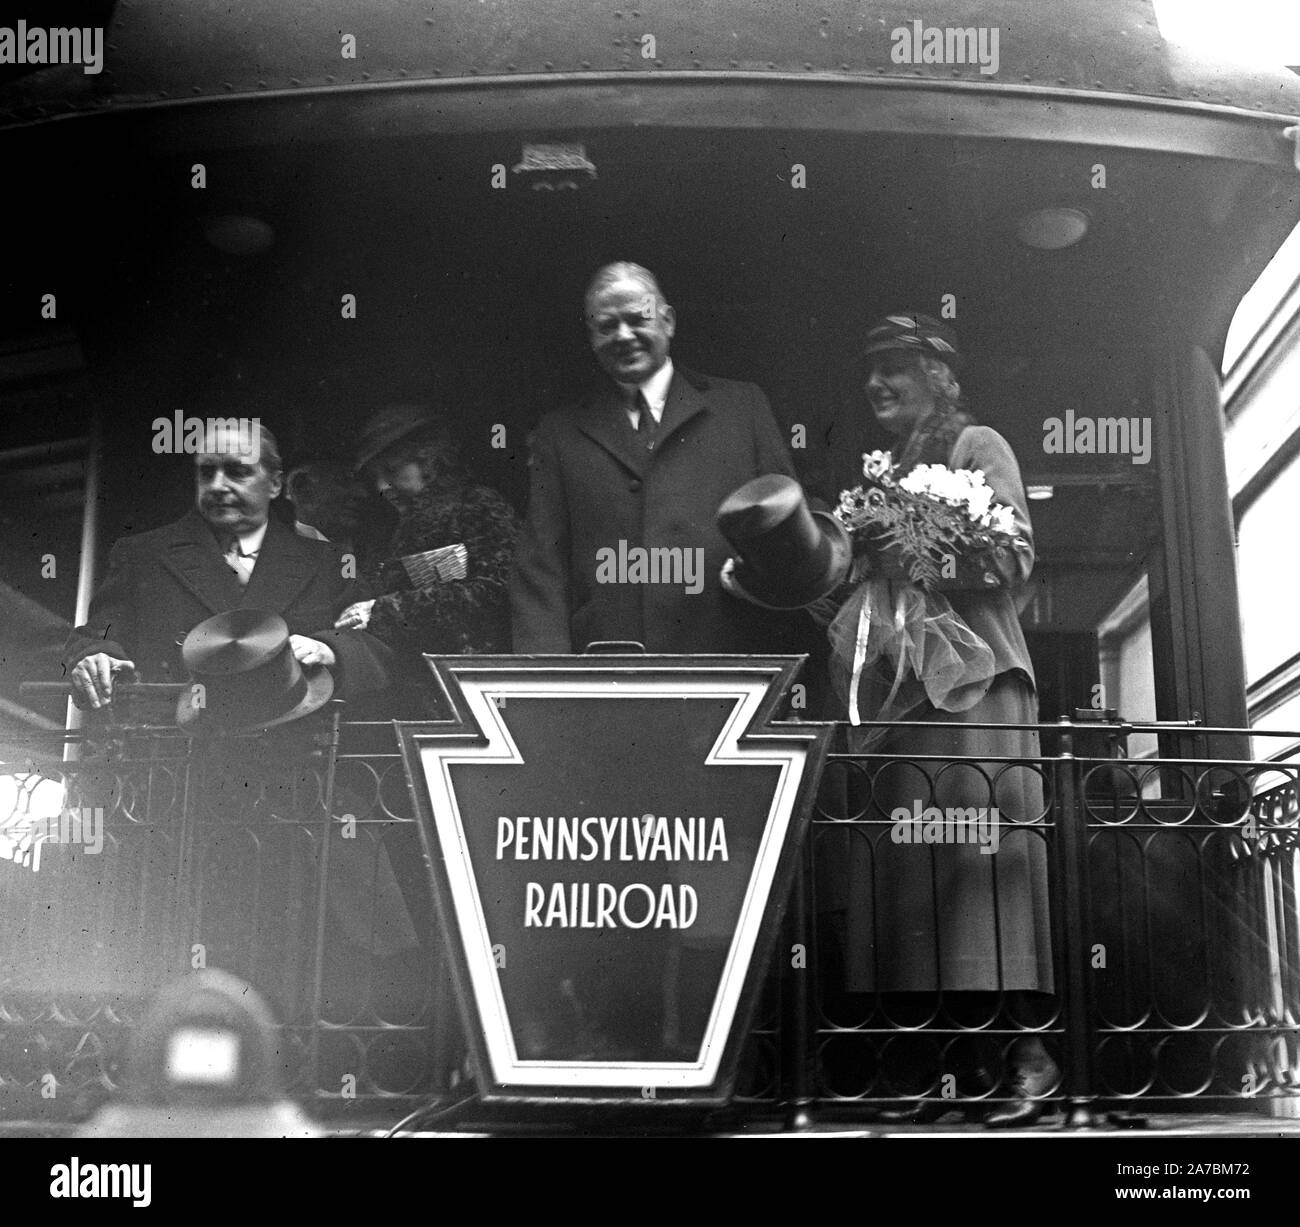 Franklin Roosevelt First Inaguration:   Herbert and Lou Hoover on train caboose  March 4, 1933 Stock Photo